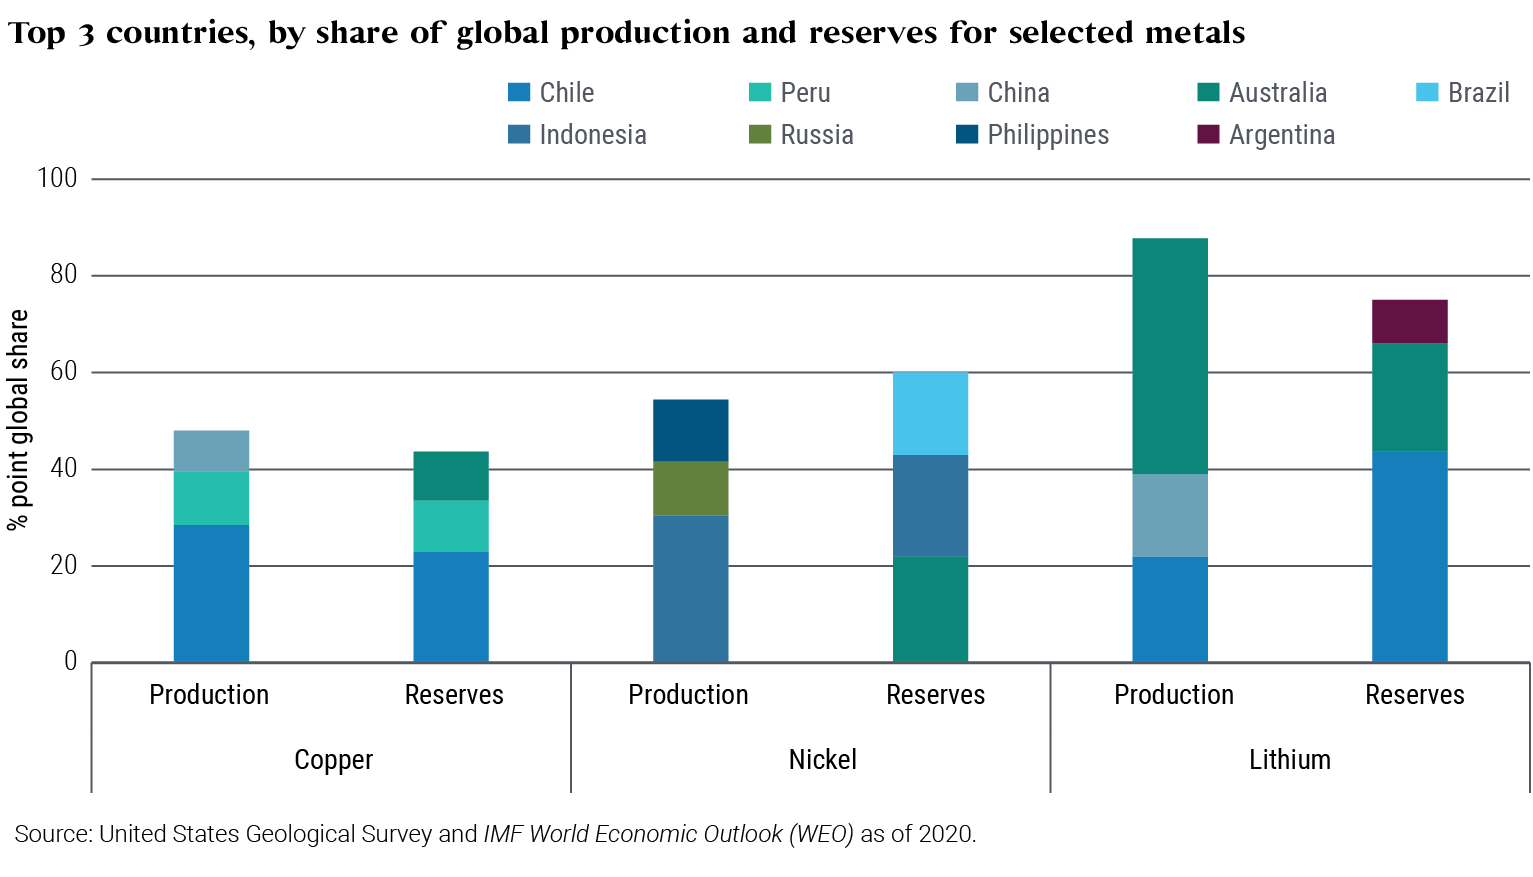 This bar chart shows the production and reserves of copper, nickel, and lithium by country as of 2020. For copper, Chile is the largest producer and has the highest reserves. For Nickel, Indonesia is the largest producer but has reserves on par with Australia and only slightly more than Brazil. For Lithium, Australia is by far the largest producer, but has roughly half the reserves of Chile.